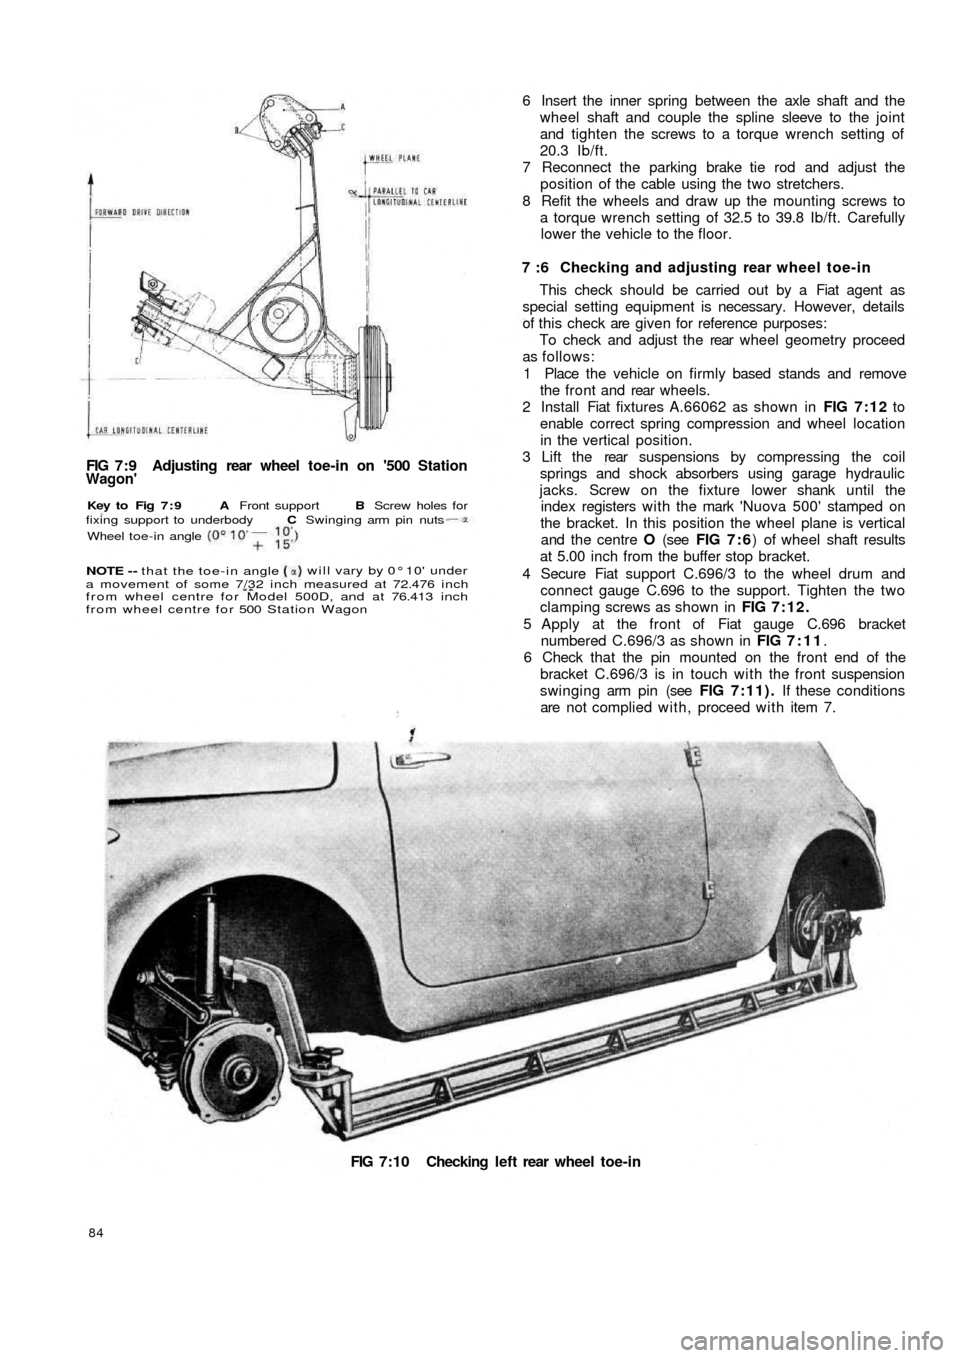 FIAT 500 1965 1.G Workshop Manual FIG 7:9  Adjusting  rear  wheel toe-in on 500 StationWagon
FIG 7:10 Checking left rear wheel toe-in
84
6 Insert the inner spring between the axle shaft and the
wheel shaft and couple the spline slee